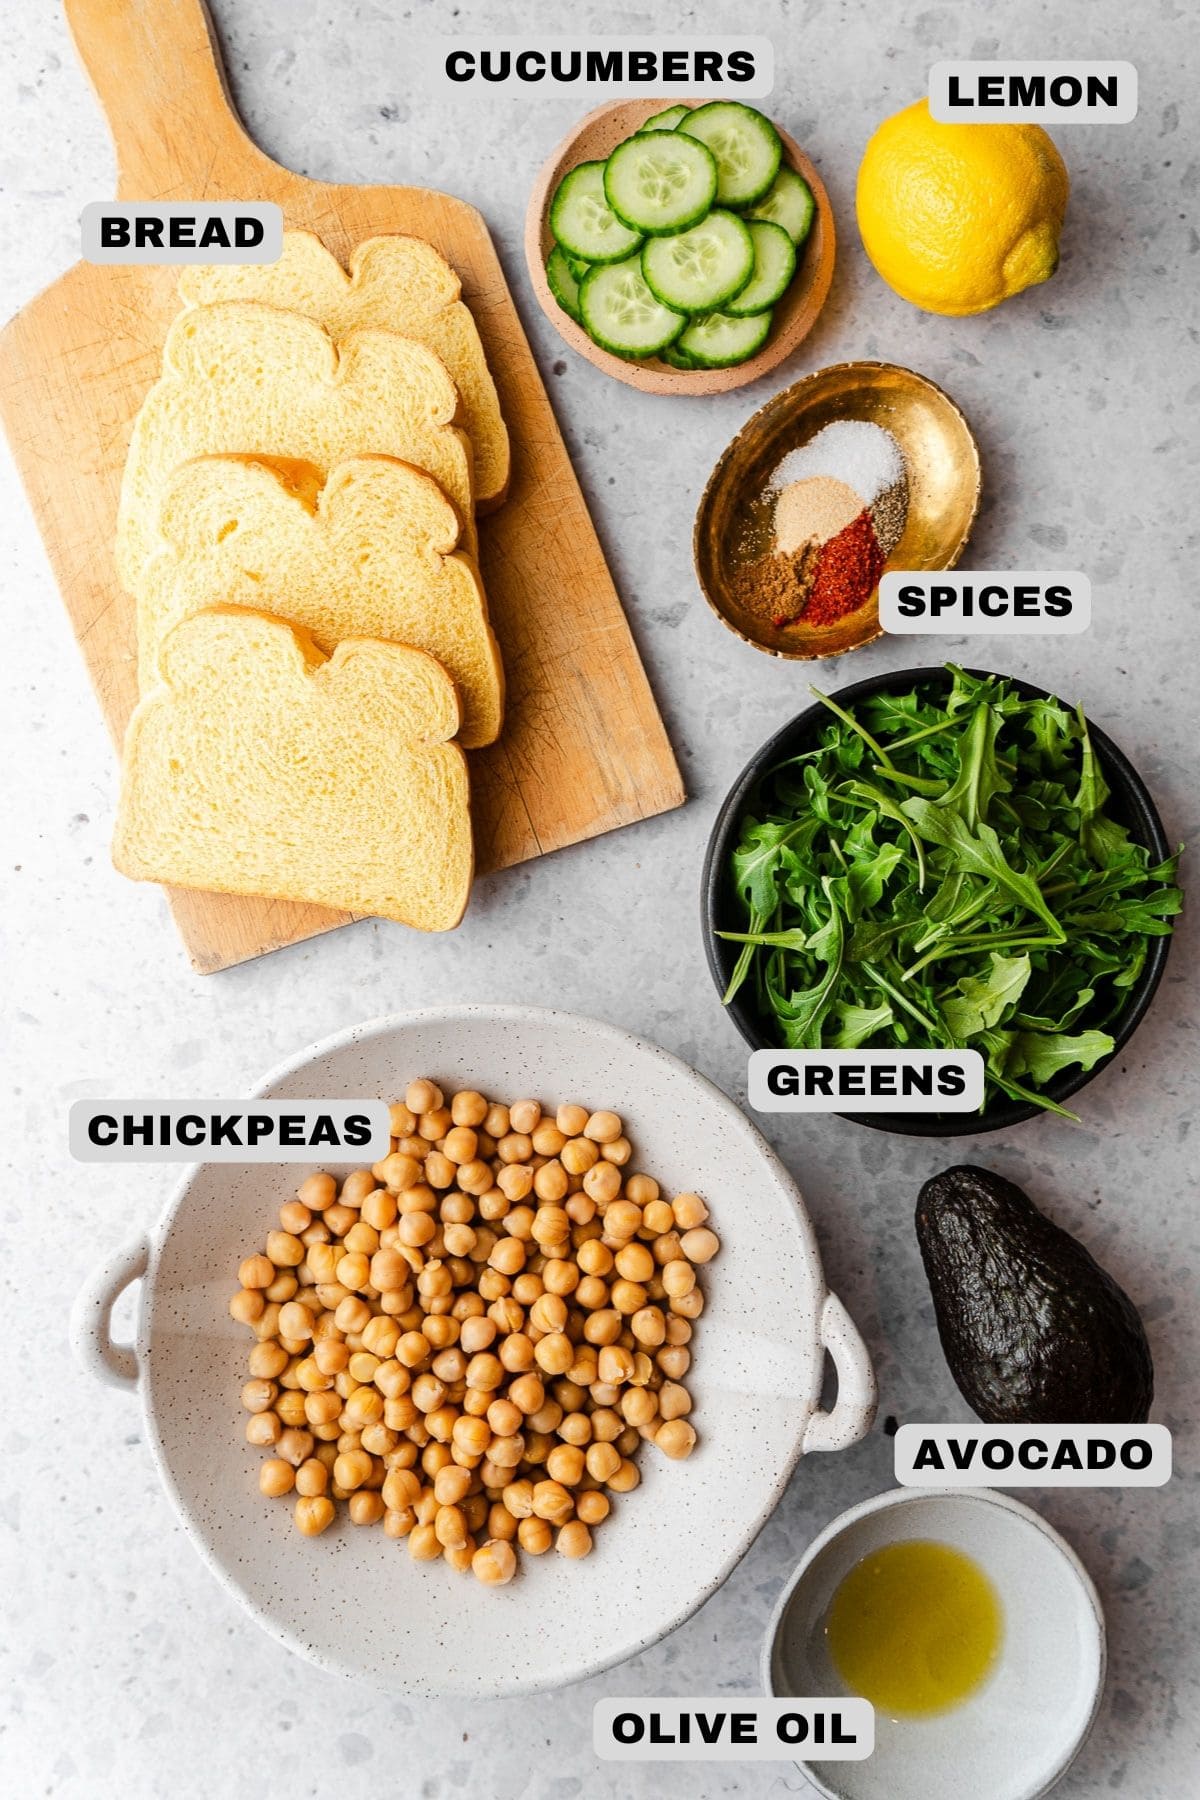 Bread, cucumbers, lemon, spices, greens, avocado, chickpeas, olive oil ingredients with labels.